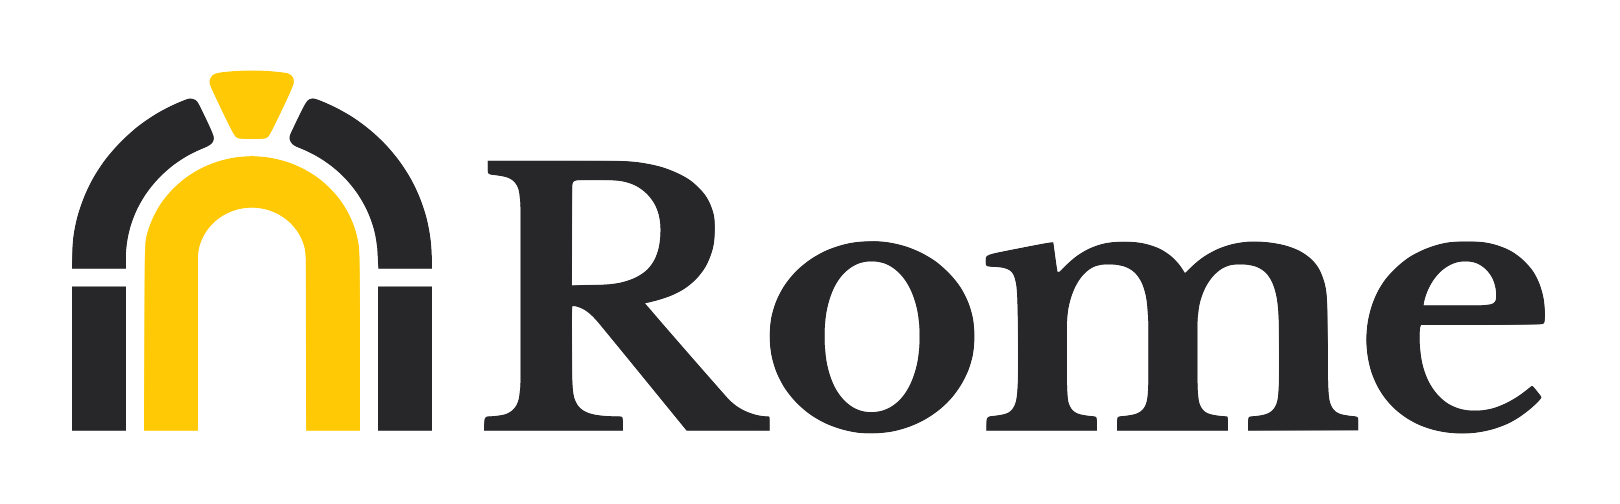 Rome's logo depicting an ancient Roman arch with the word Rome to its side